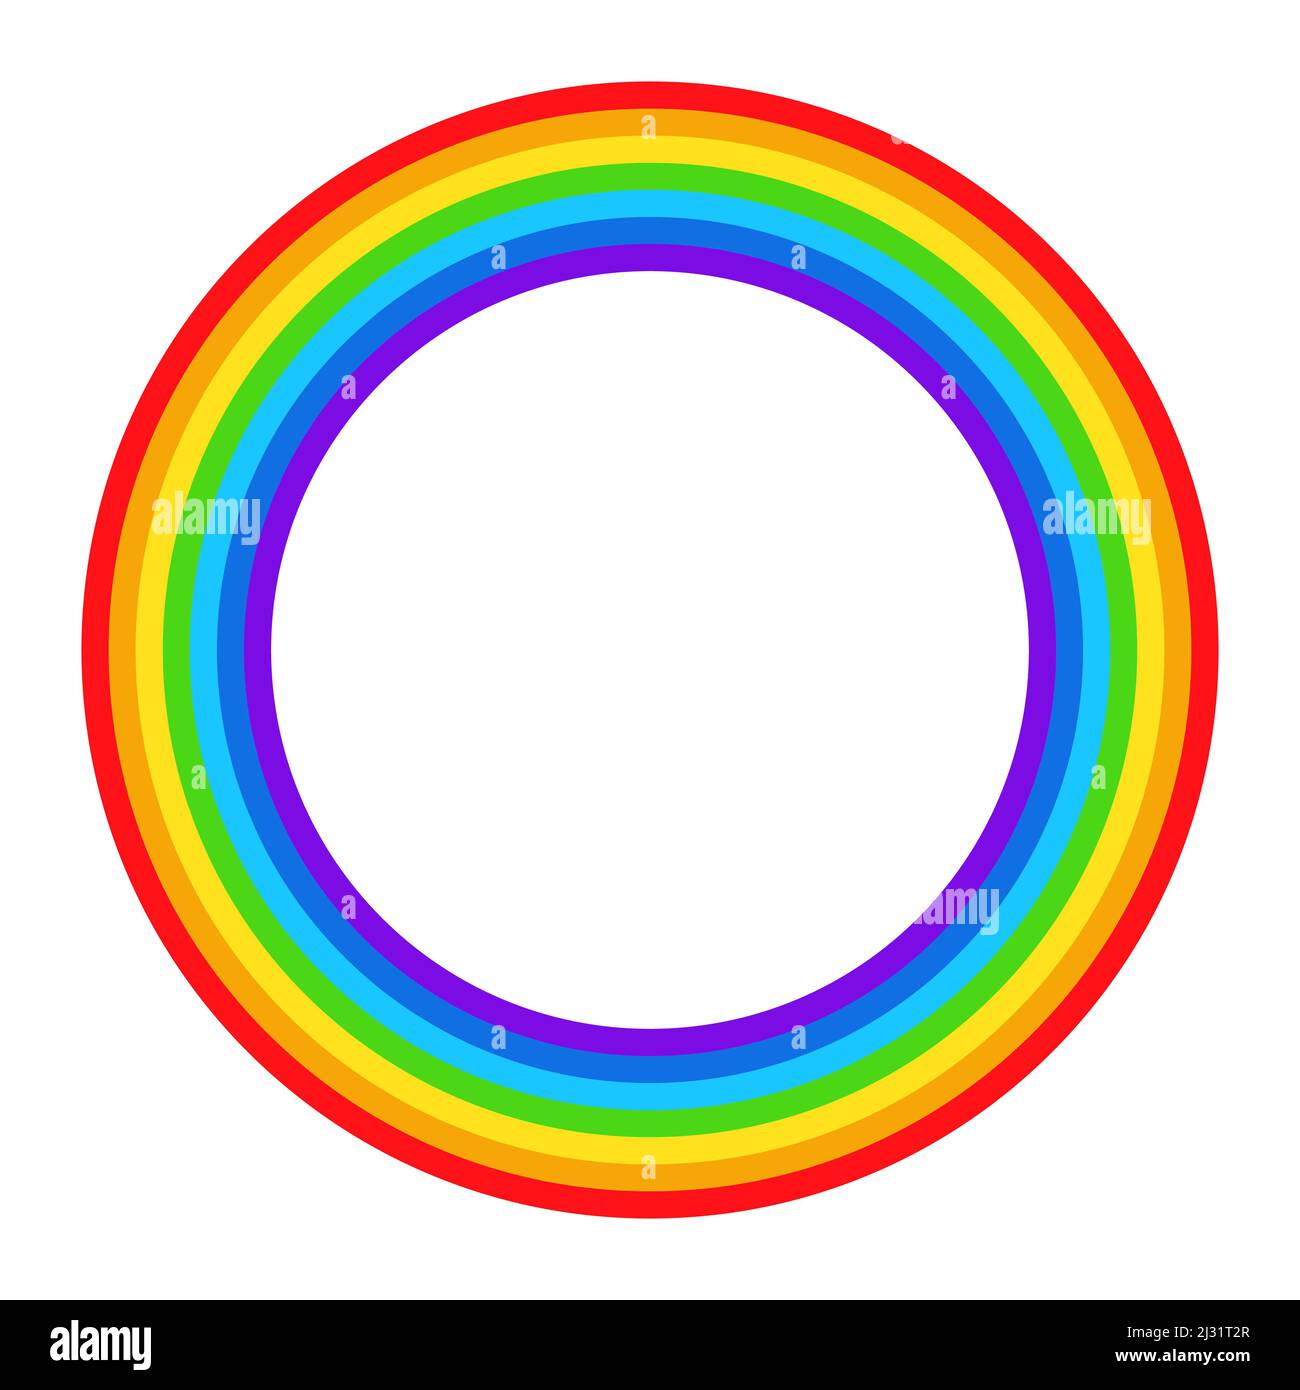 Circle rainbow icon. Full round shape of color spectrum. Vector illustration isolated on white Stock Vector